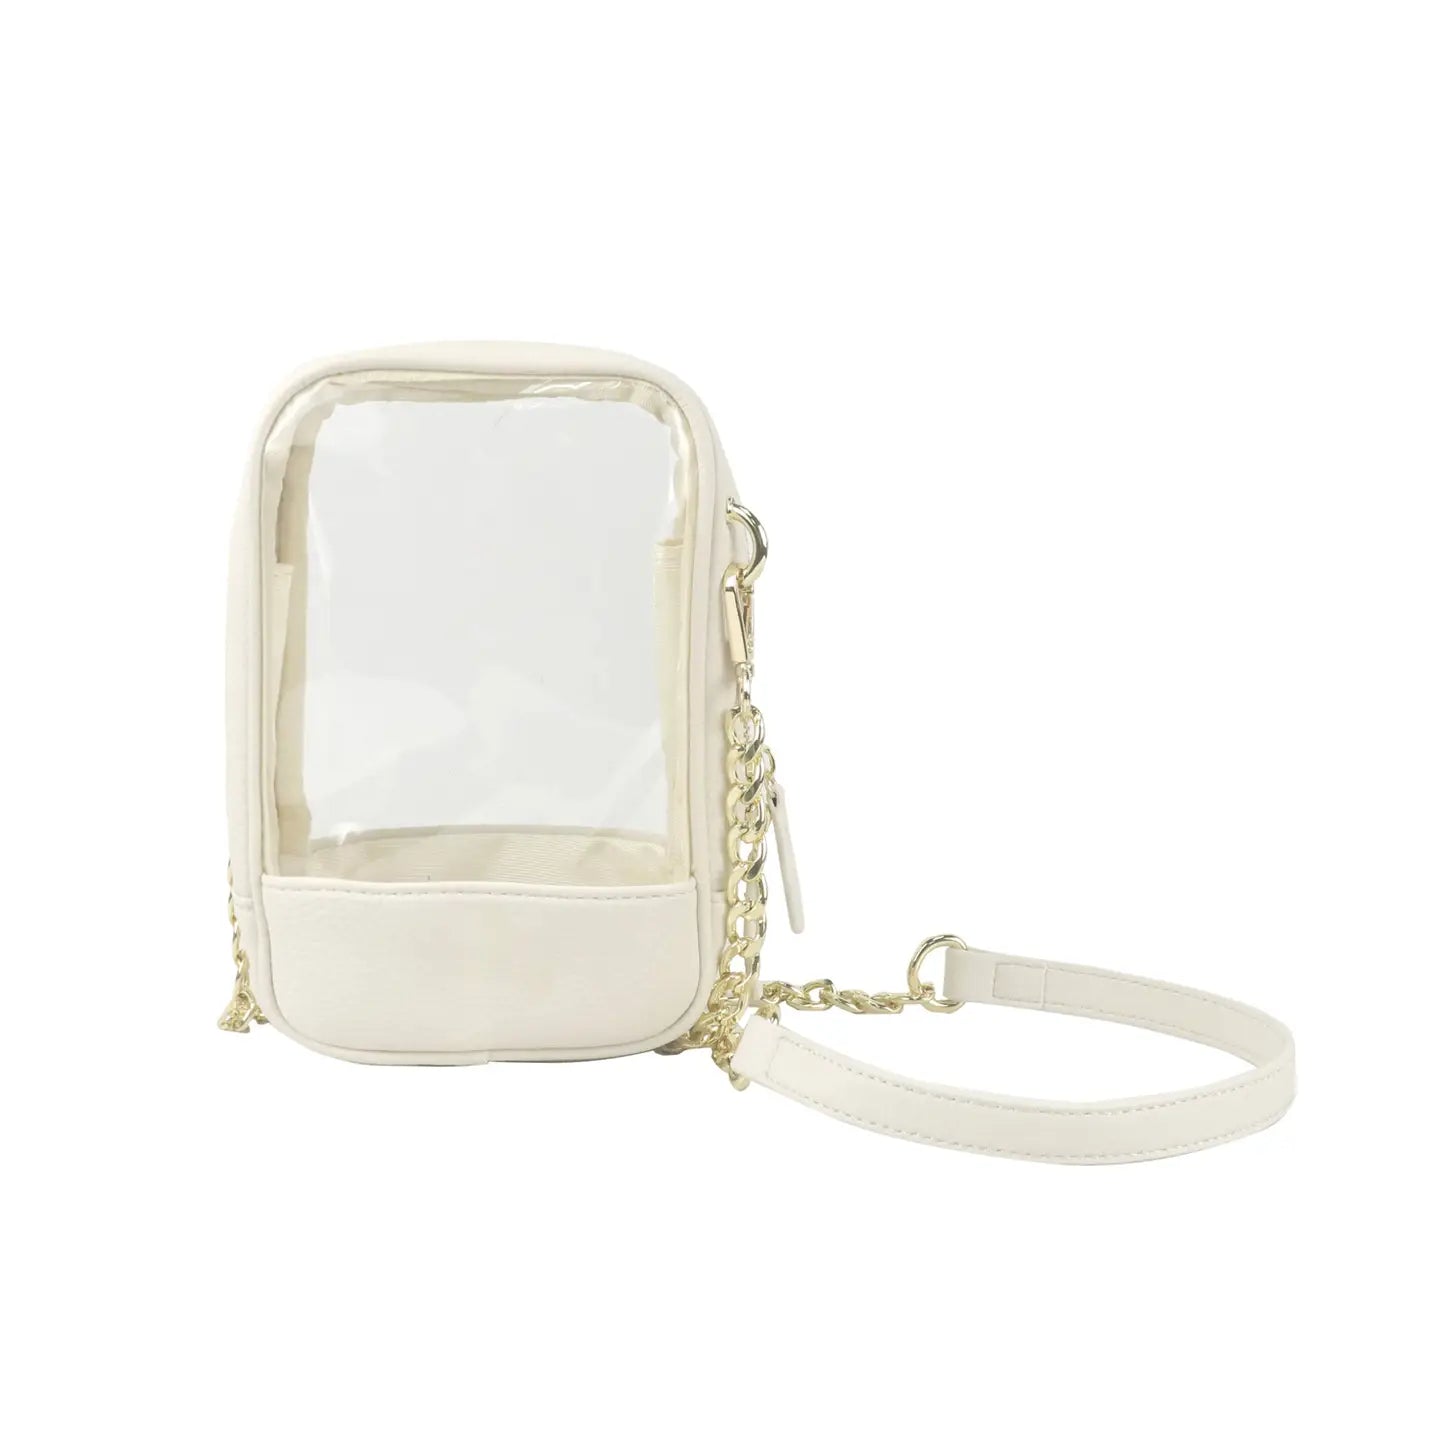 Natalie Wood - Grace Clear Crossbody in Cream-130 Accessories-Natalie Wood-July & June Women's Fashion Boutique Located in San Antonio, Texas